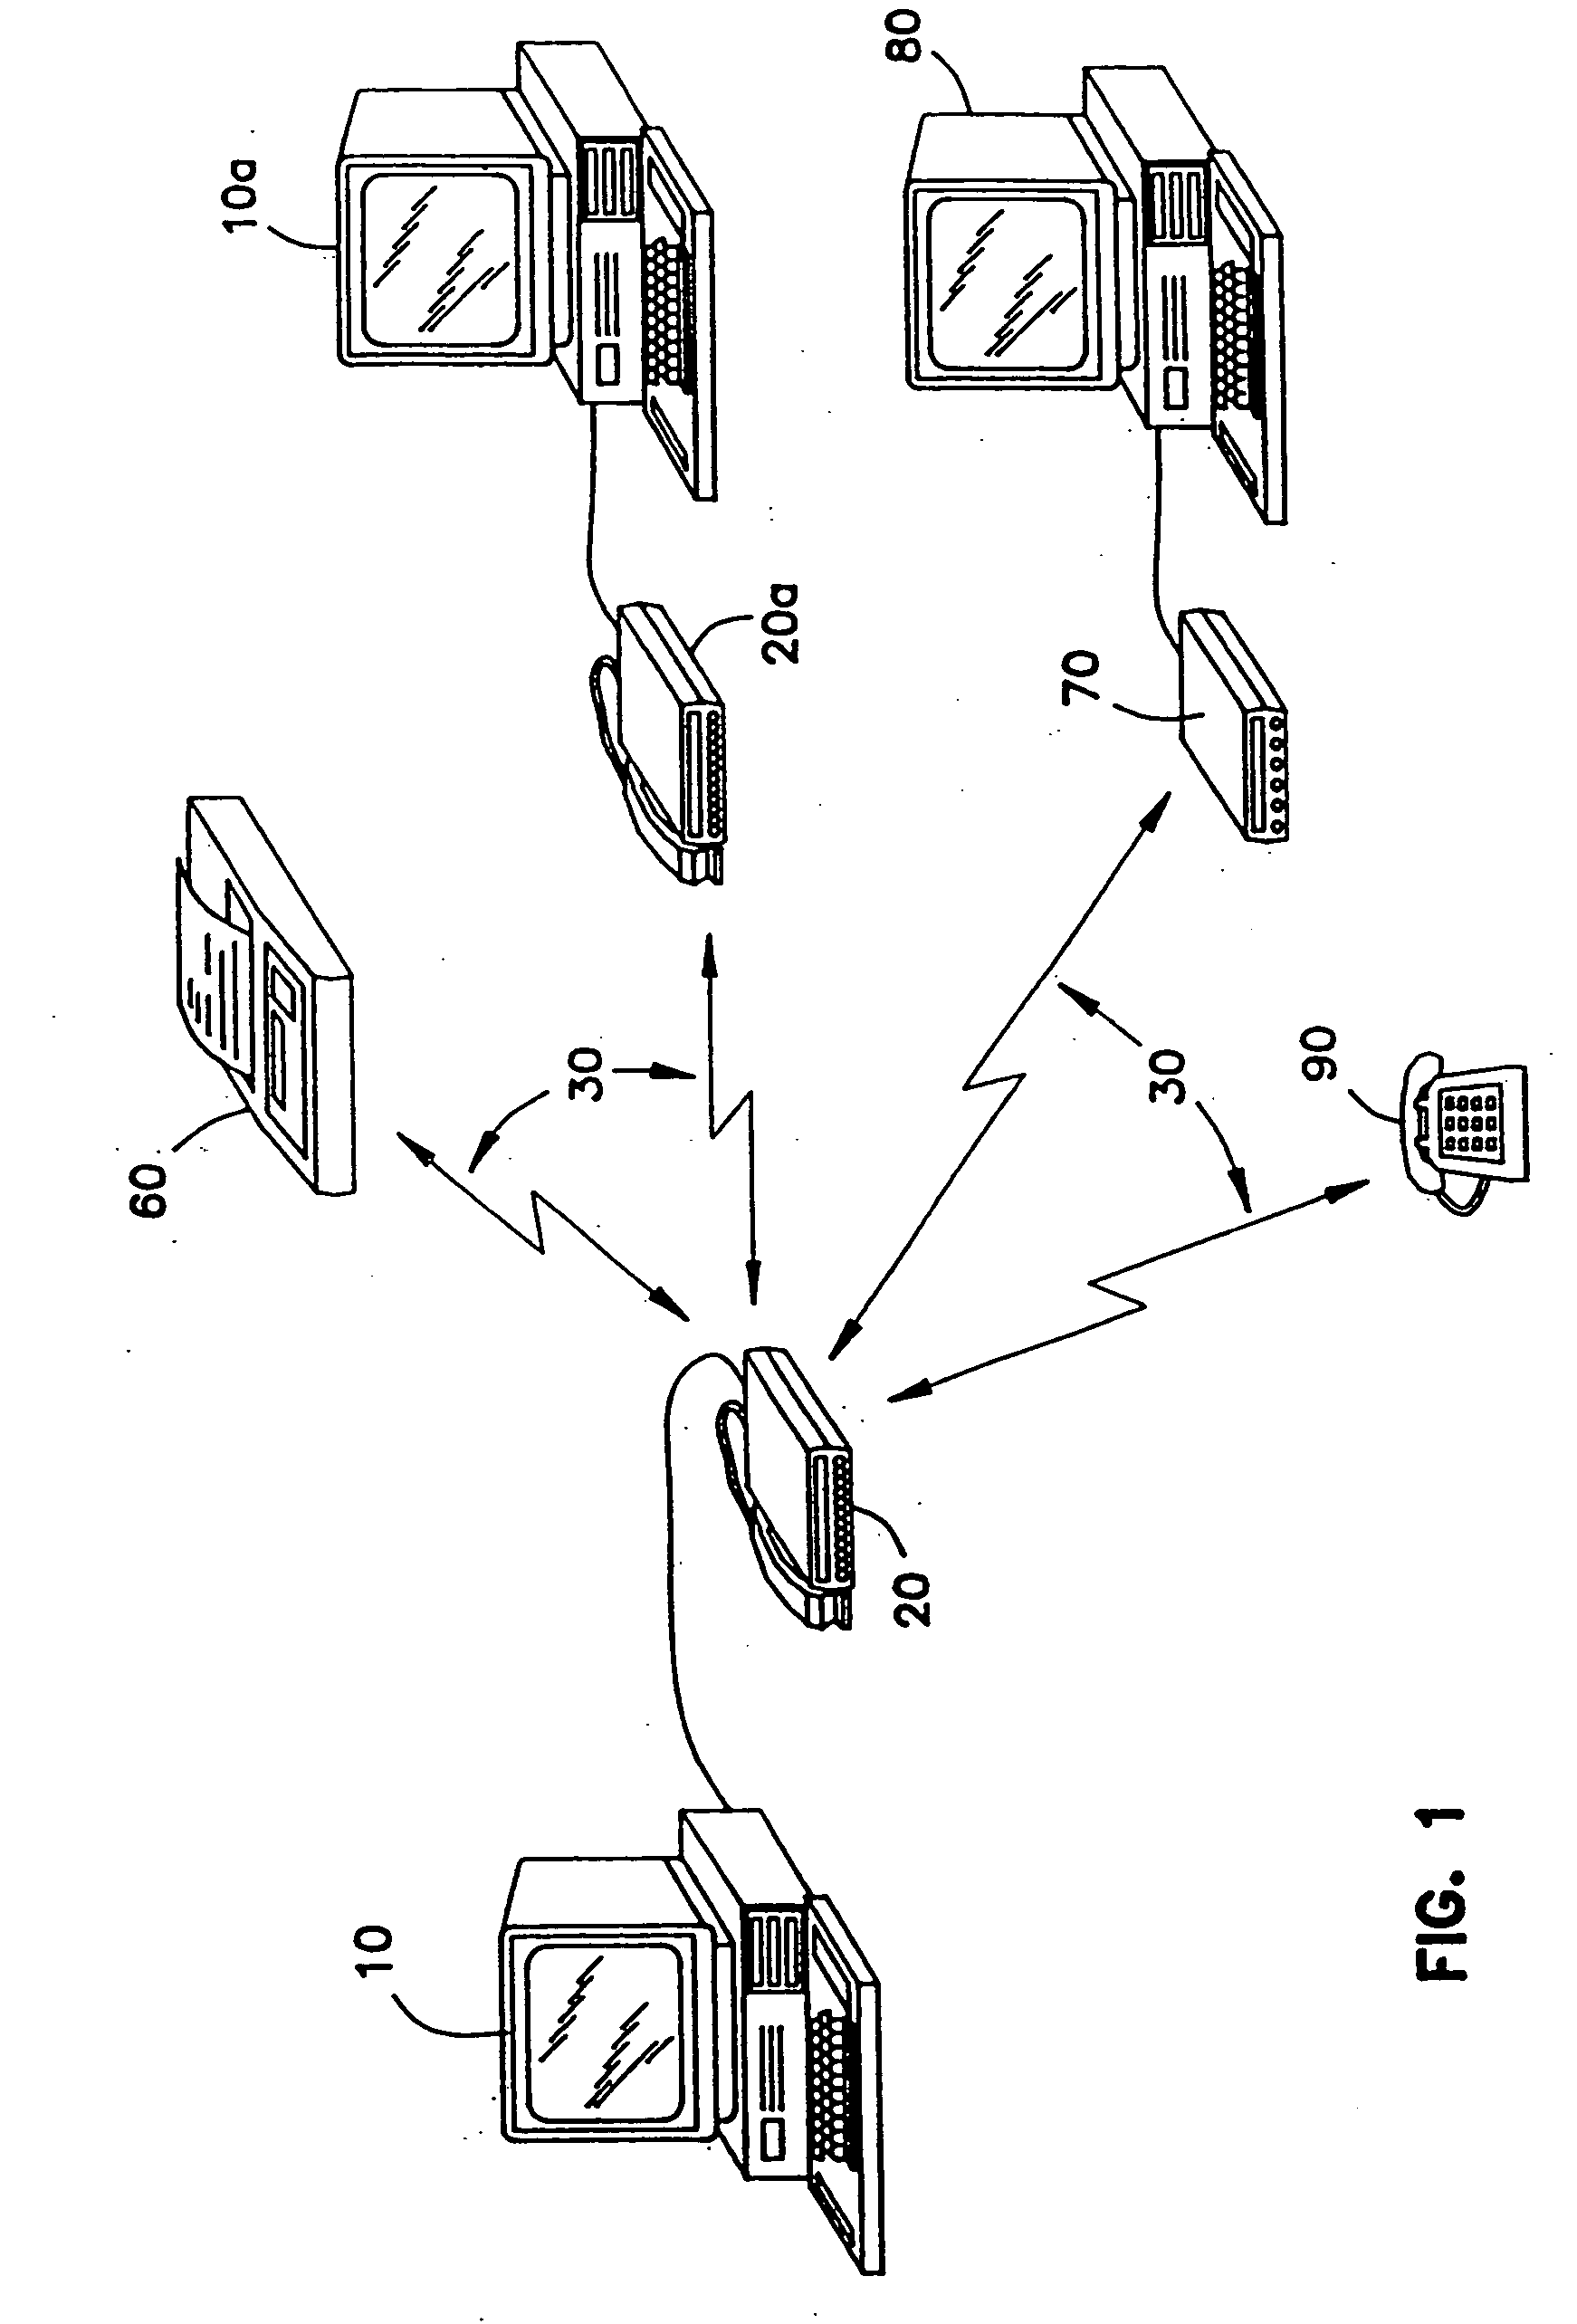 Computer-based multifunctional personal communication system with caller ID